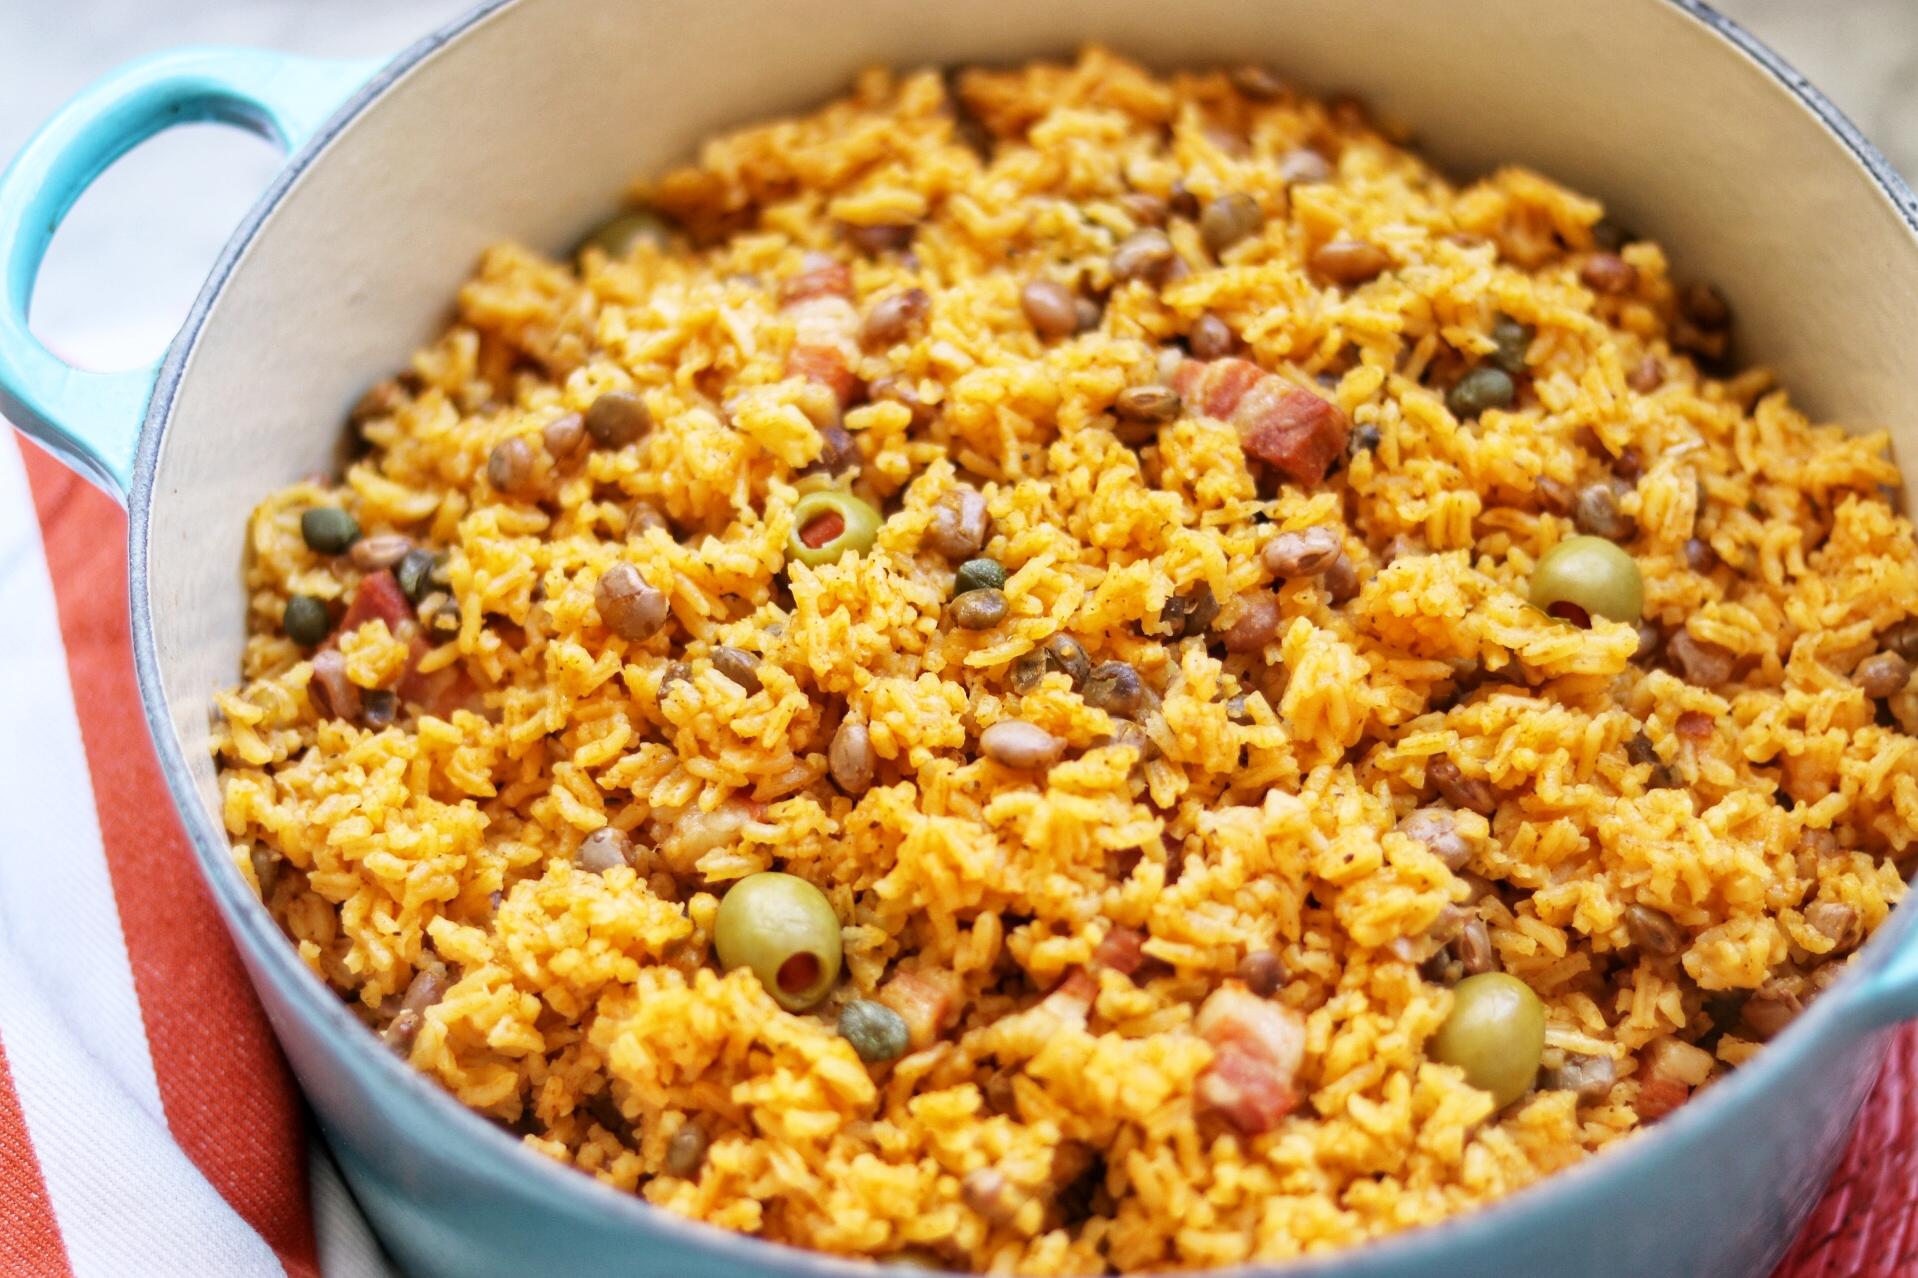  Spice up your meal with Arroz Amarillo Con Gandules!